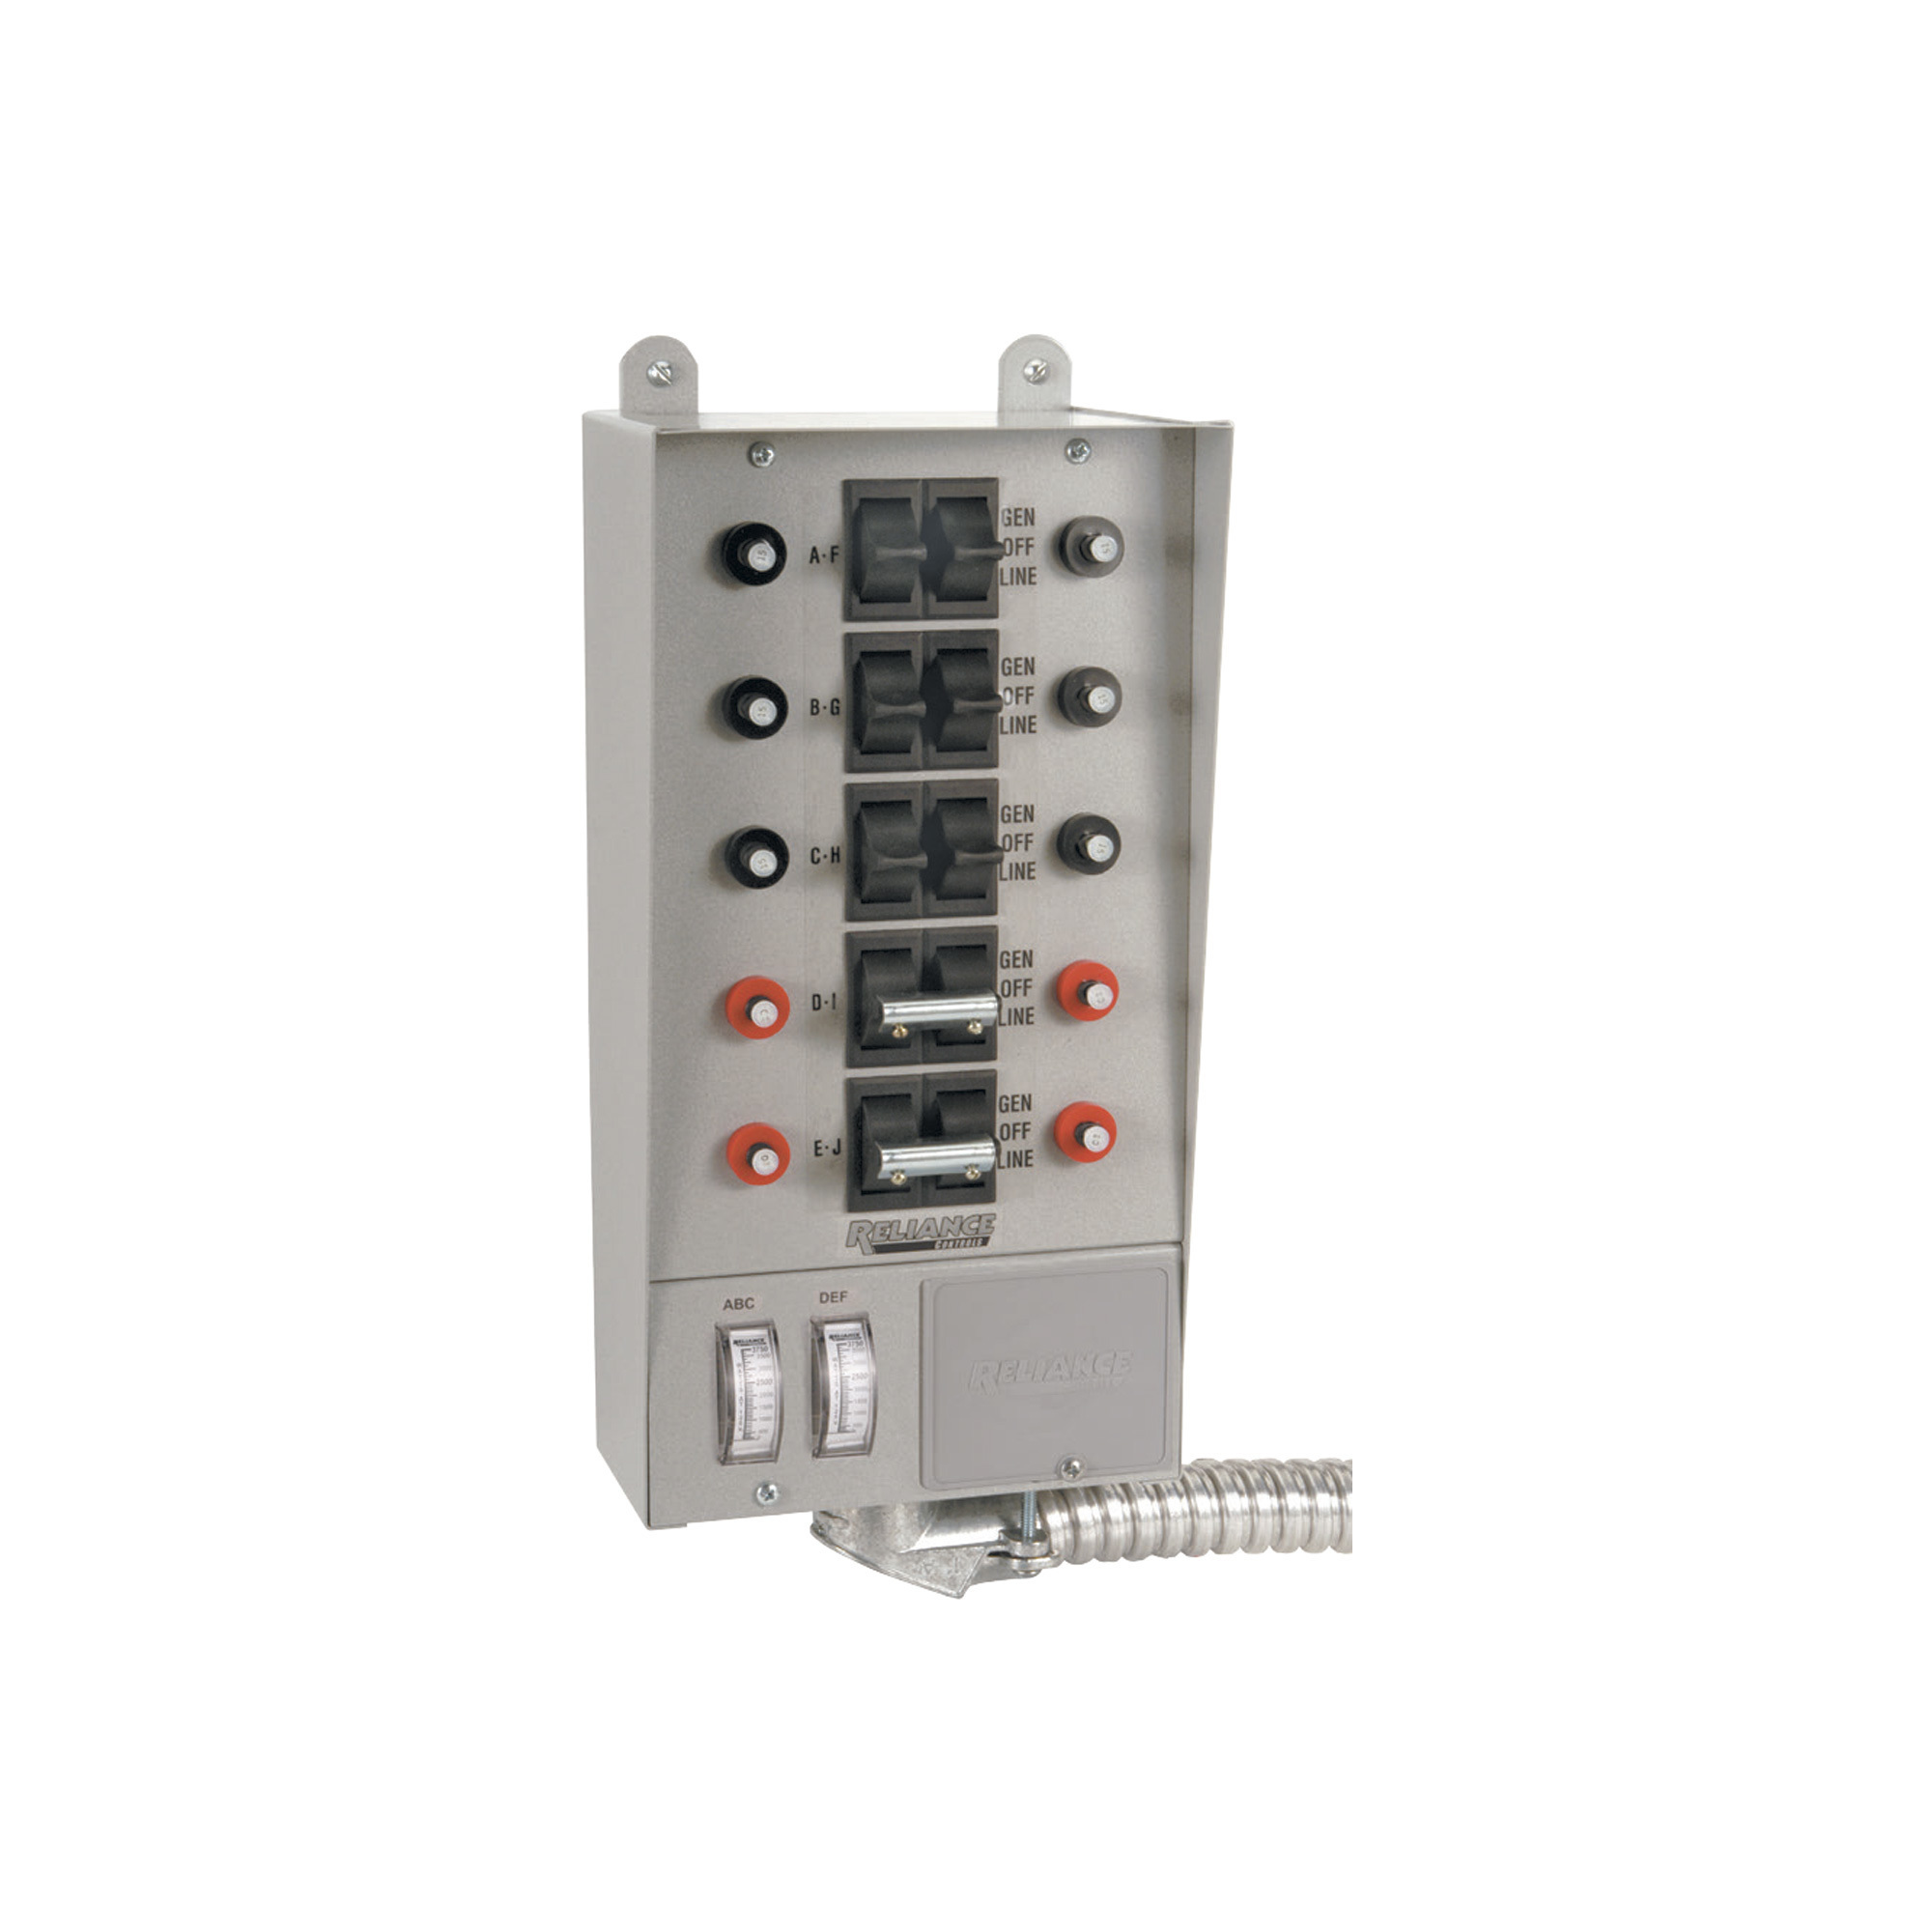 Reliance Loadside Prewired Generator Transfer Switch, 10 Circuits, 125/250 Volts, 50 Amps, 12,500 Watts, Model 51410C